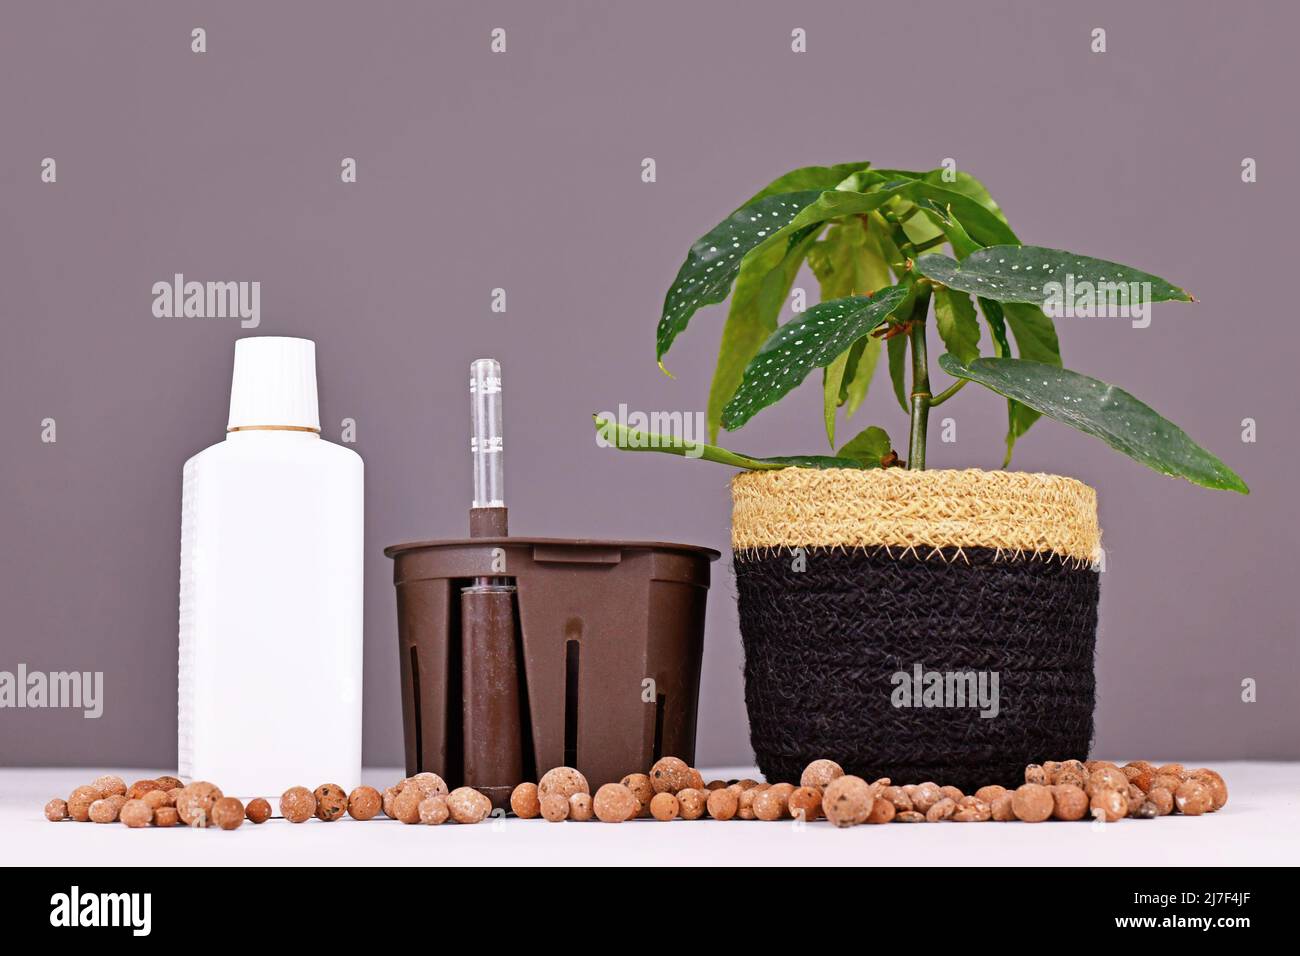 Houseplant passive hydroponics concept with pot, water indicator, plant and clay pellets Stock Photo